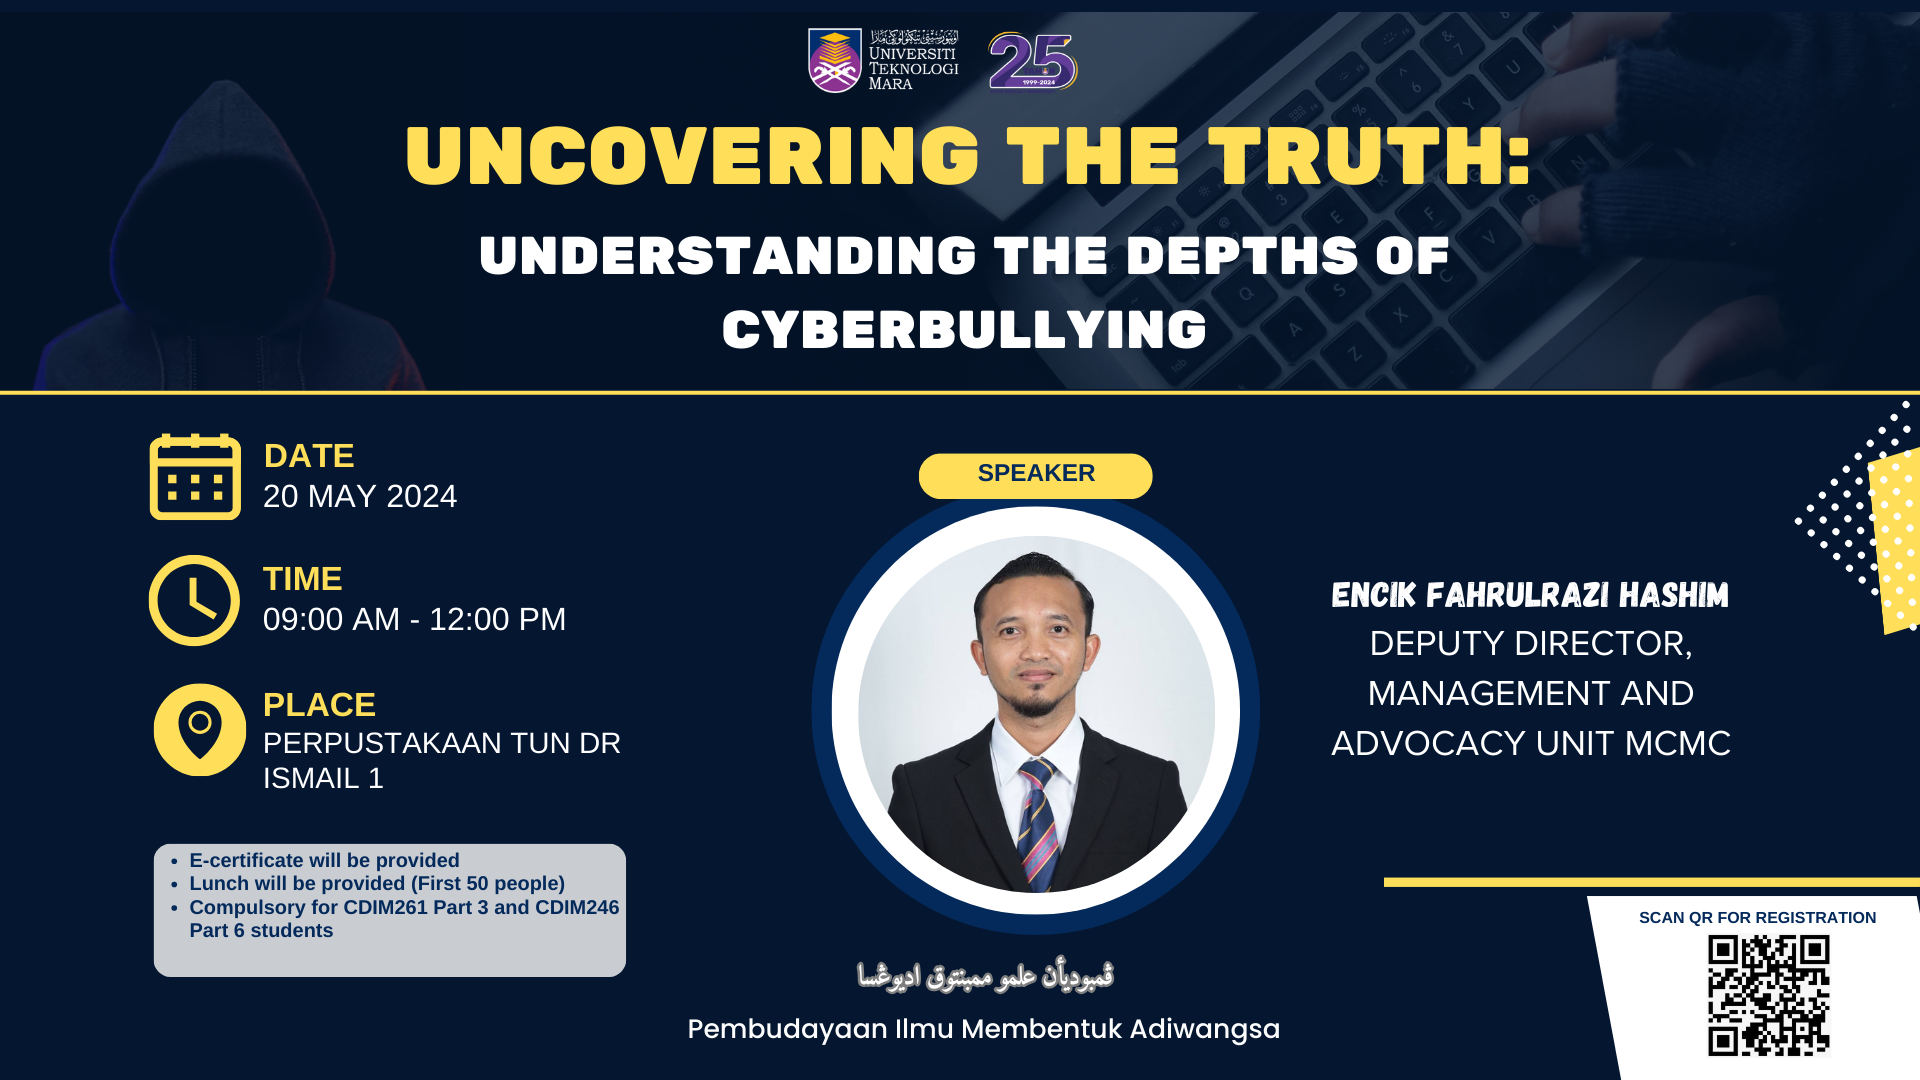 Uncovering the Truth: Understanding the Depths of Cyberbullying